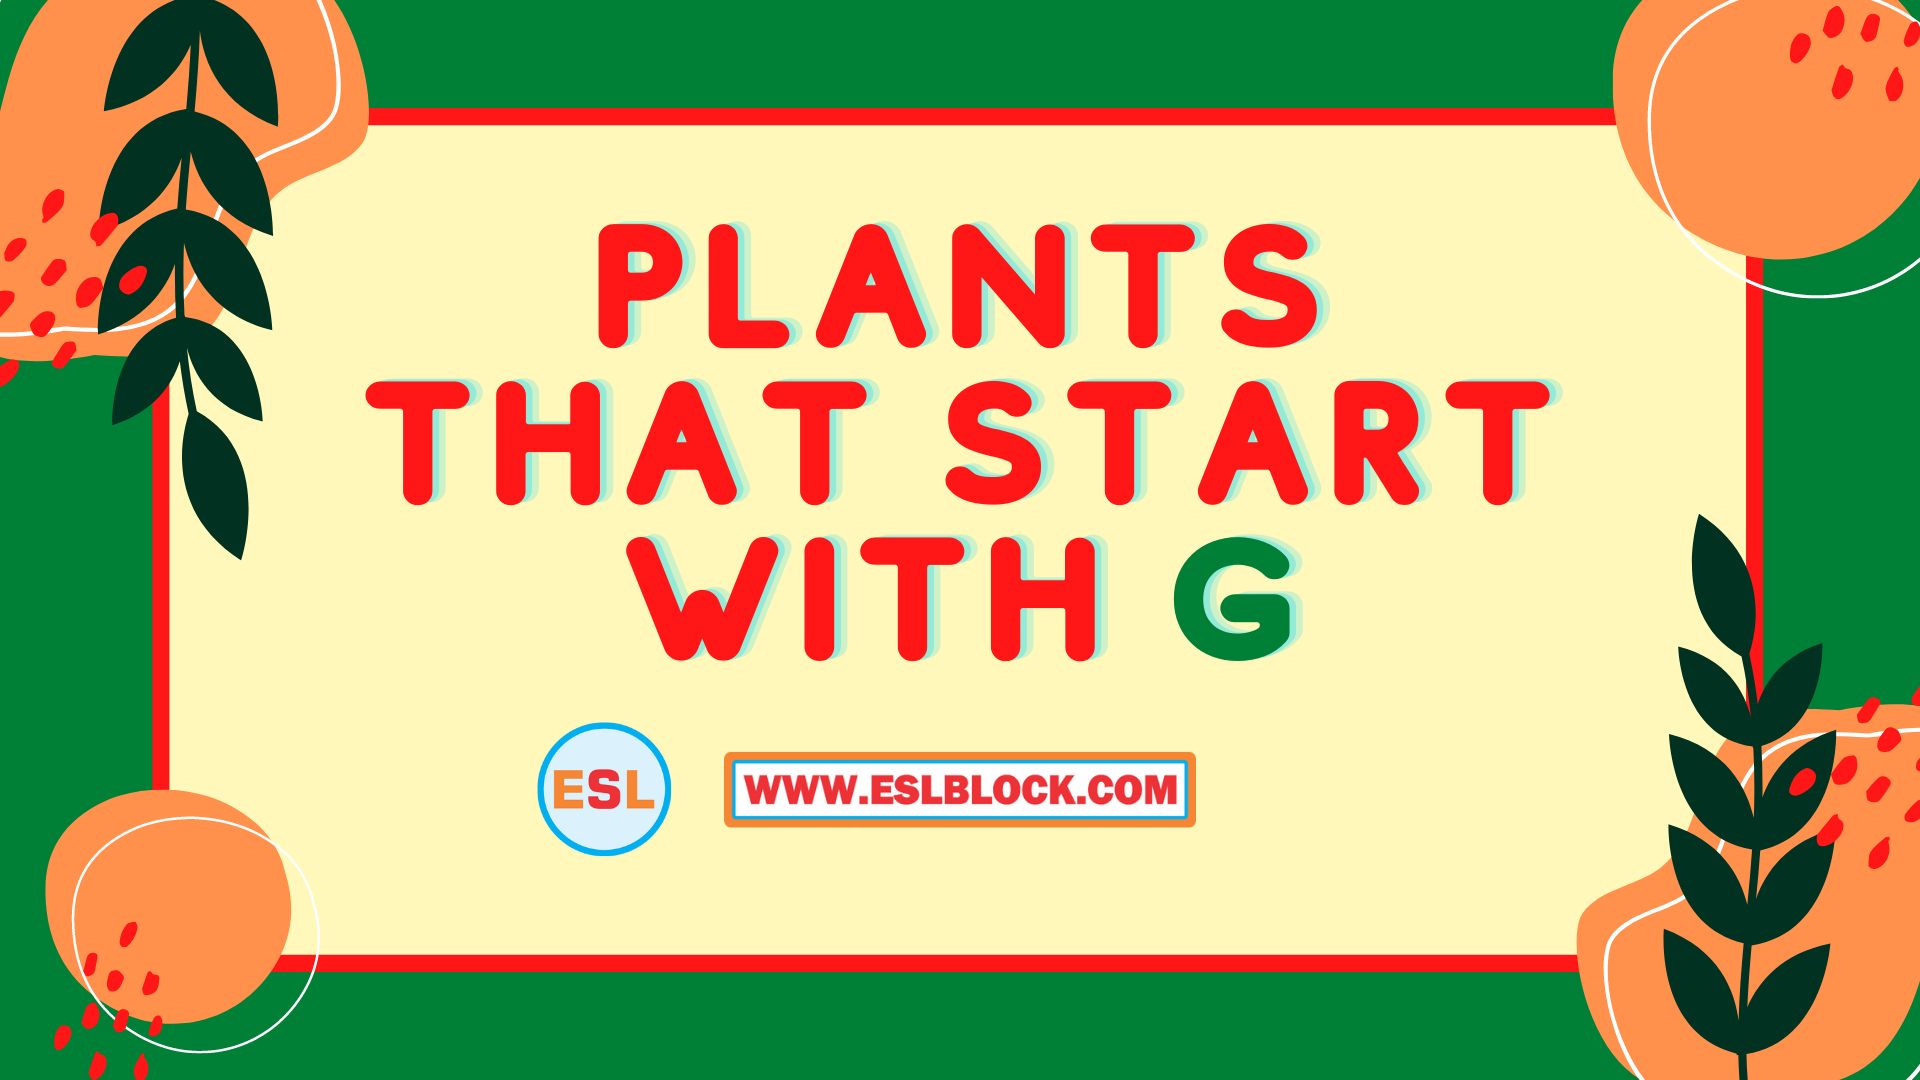 4 Letter Plants, 5 Letter Plants Starting With G, English, English Grammar, English Vocabulary, English Words, G Plants, G Plants in English, G Plants Names, List of Plants That Start With G, Plants List, Plants Names, Plants That Start With G, Vocabulary, Words That Start With G